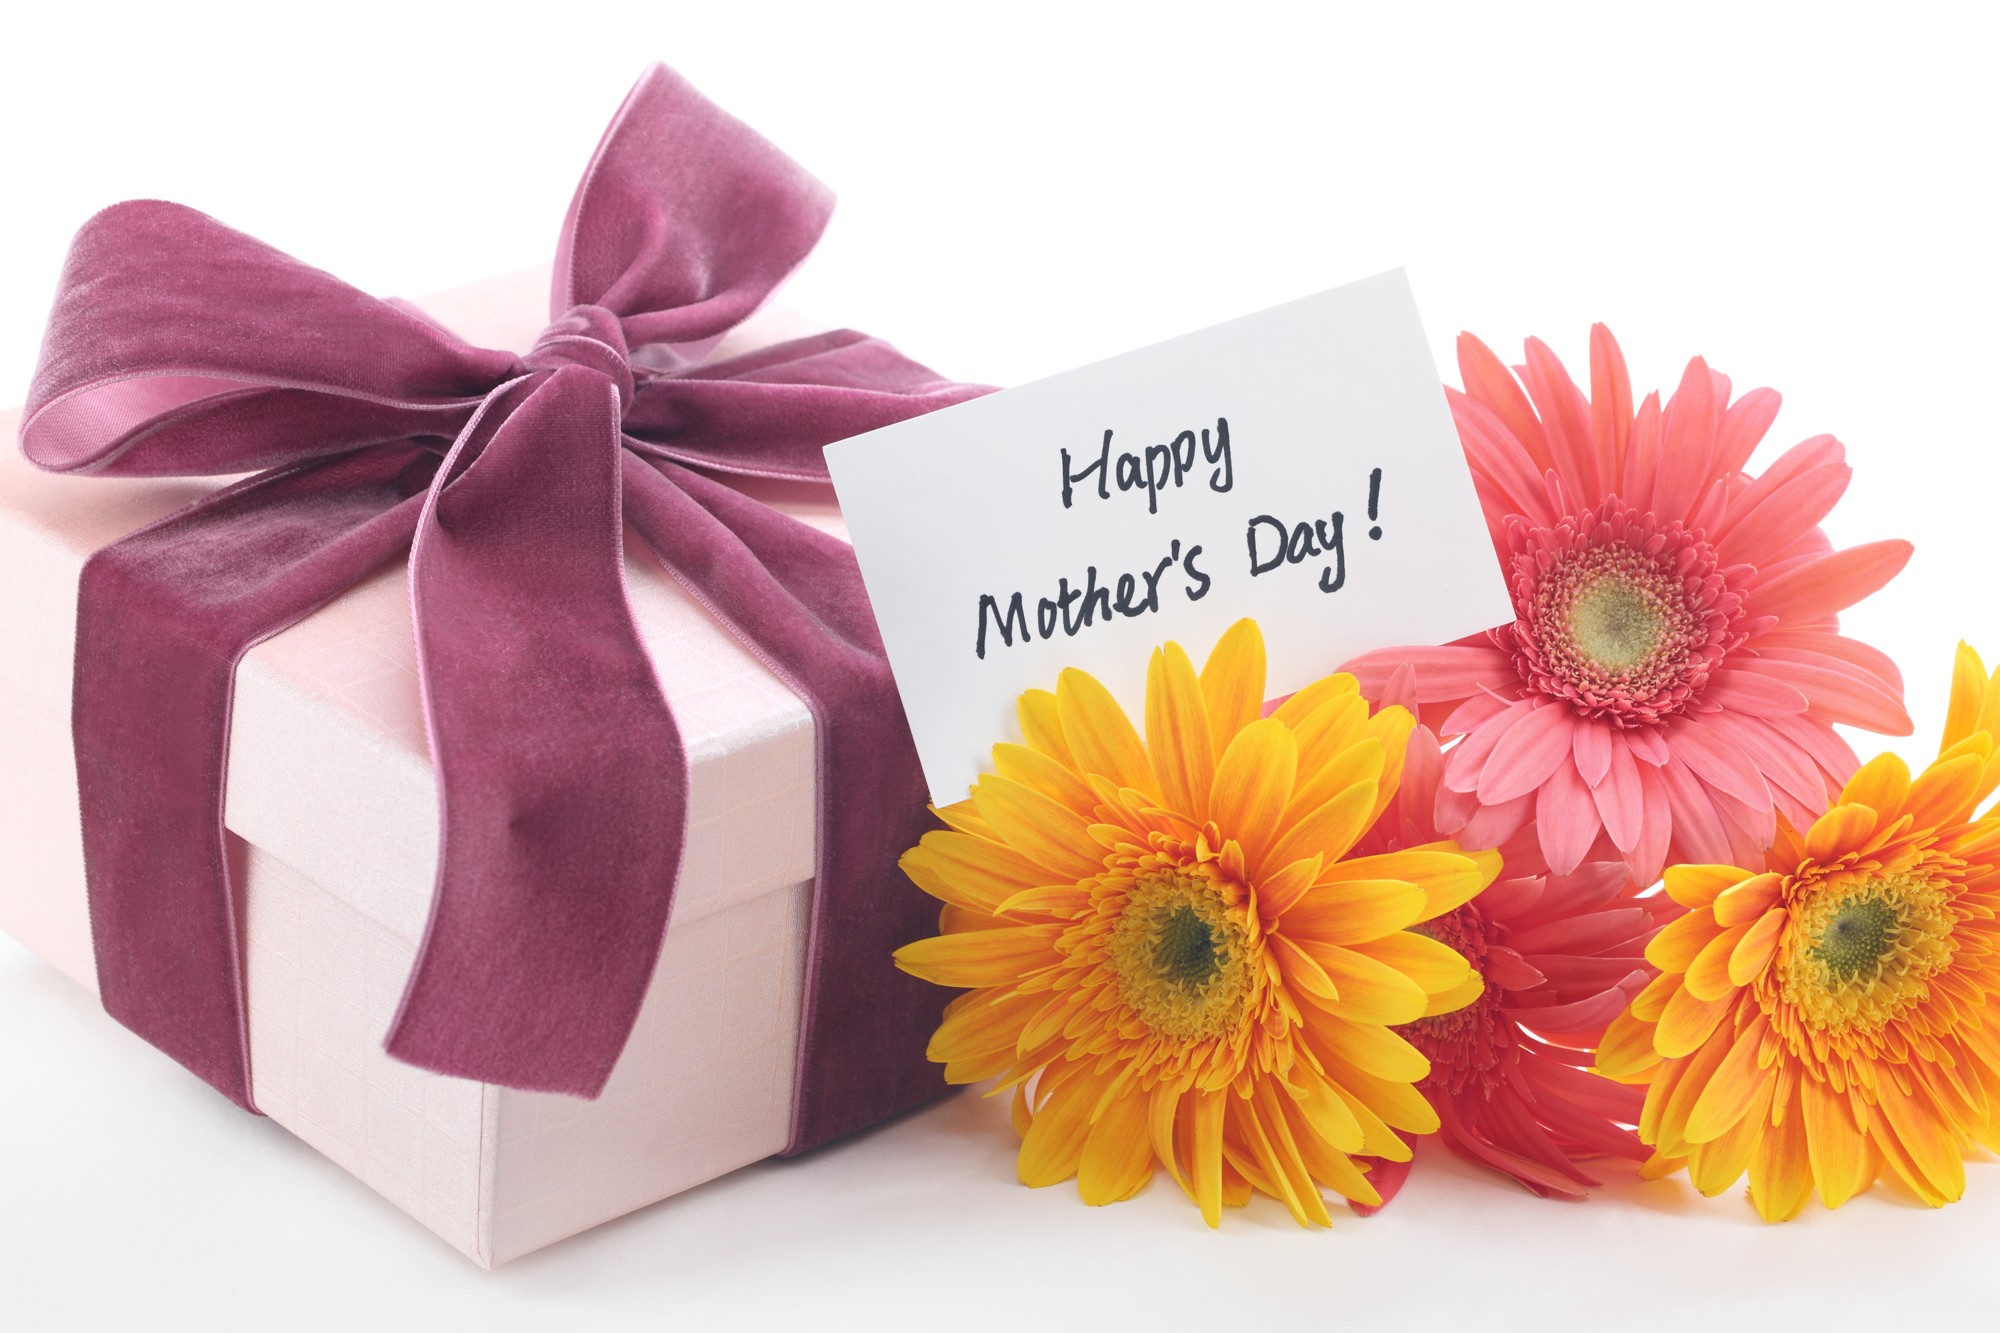 Mothers Day Special Greetings Flower Gifts Download